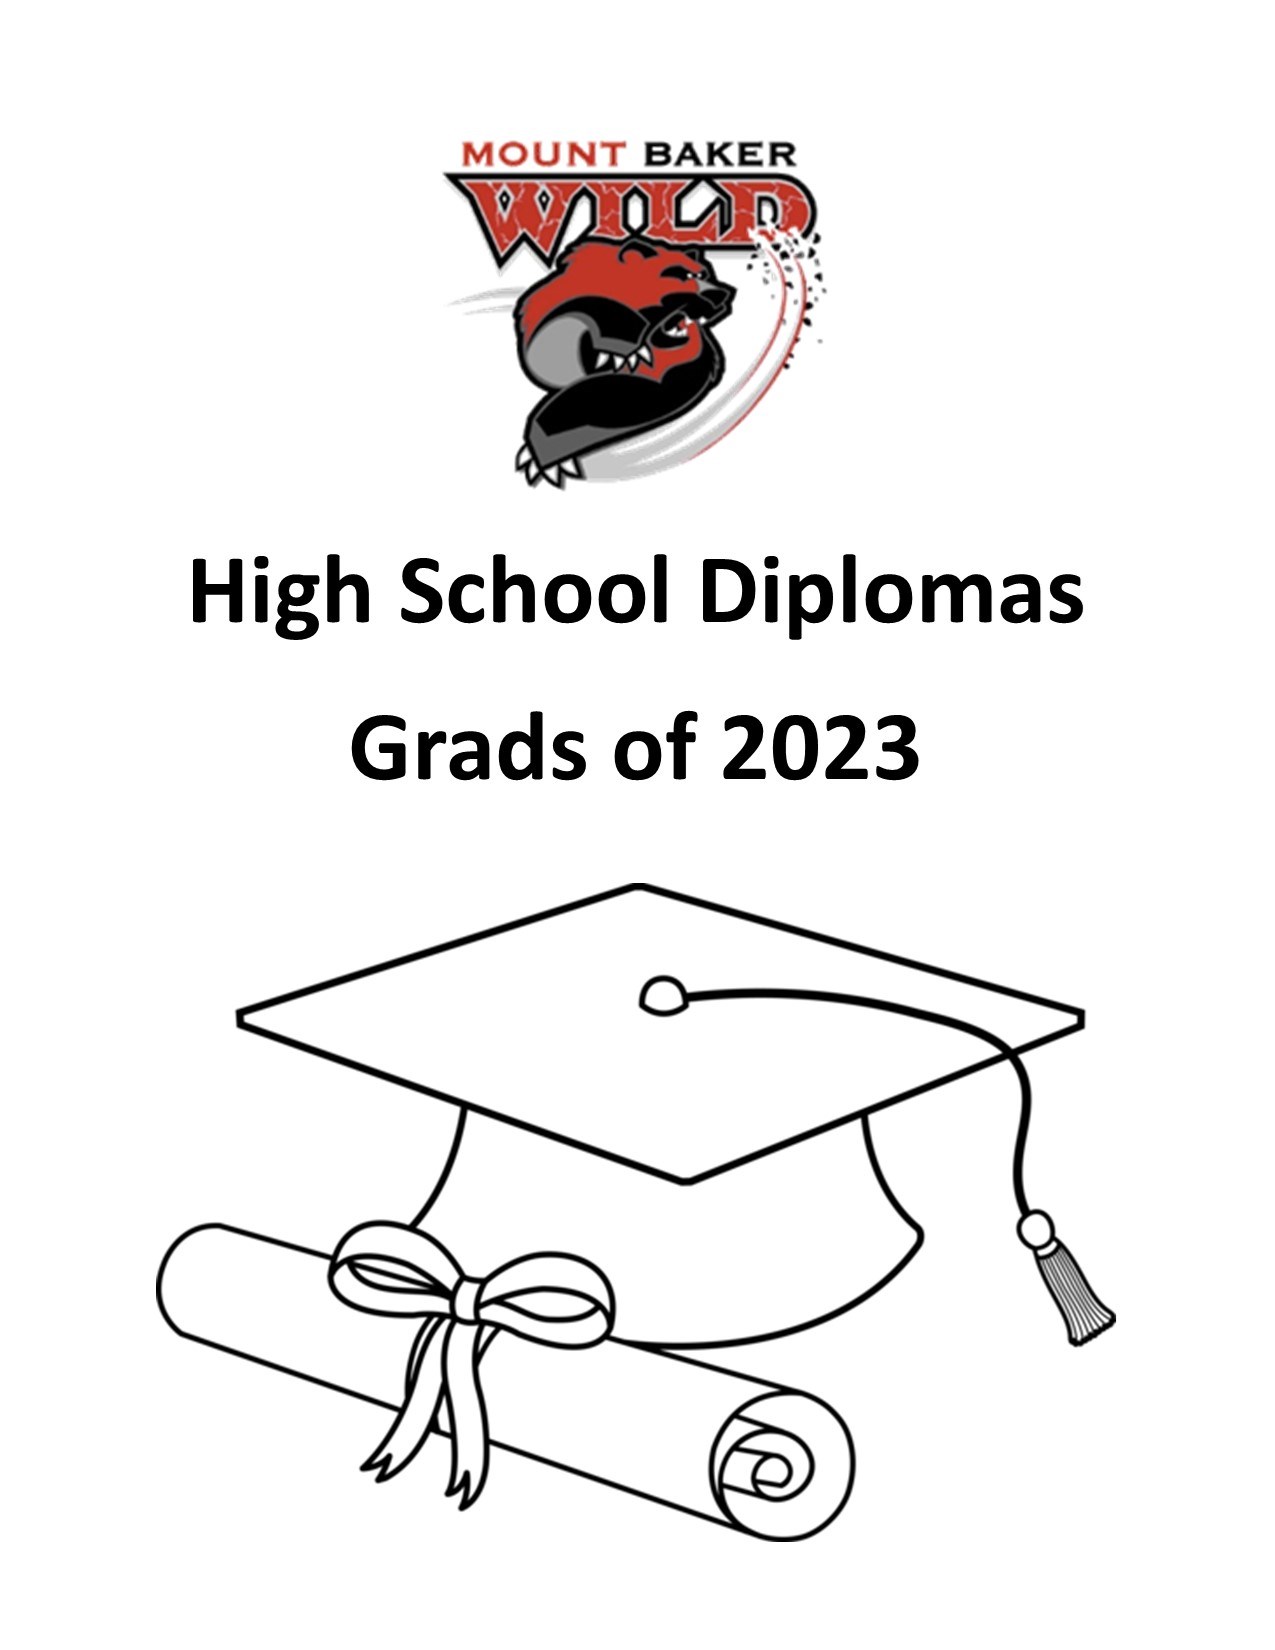 2023 DIPLOMAS ARE HERE!